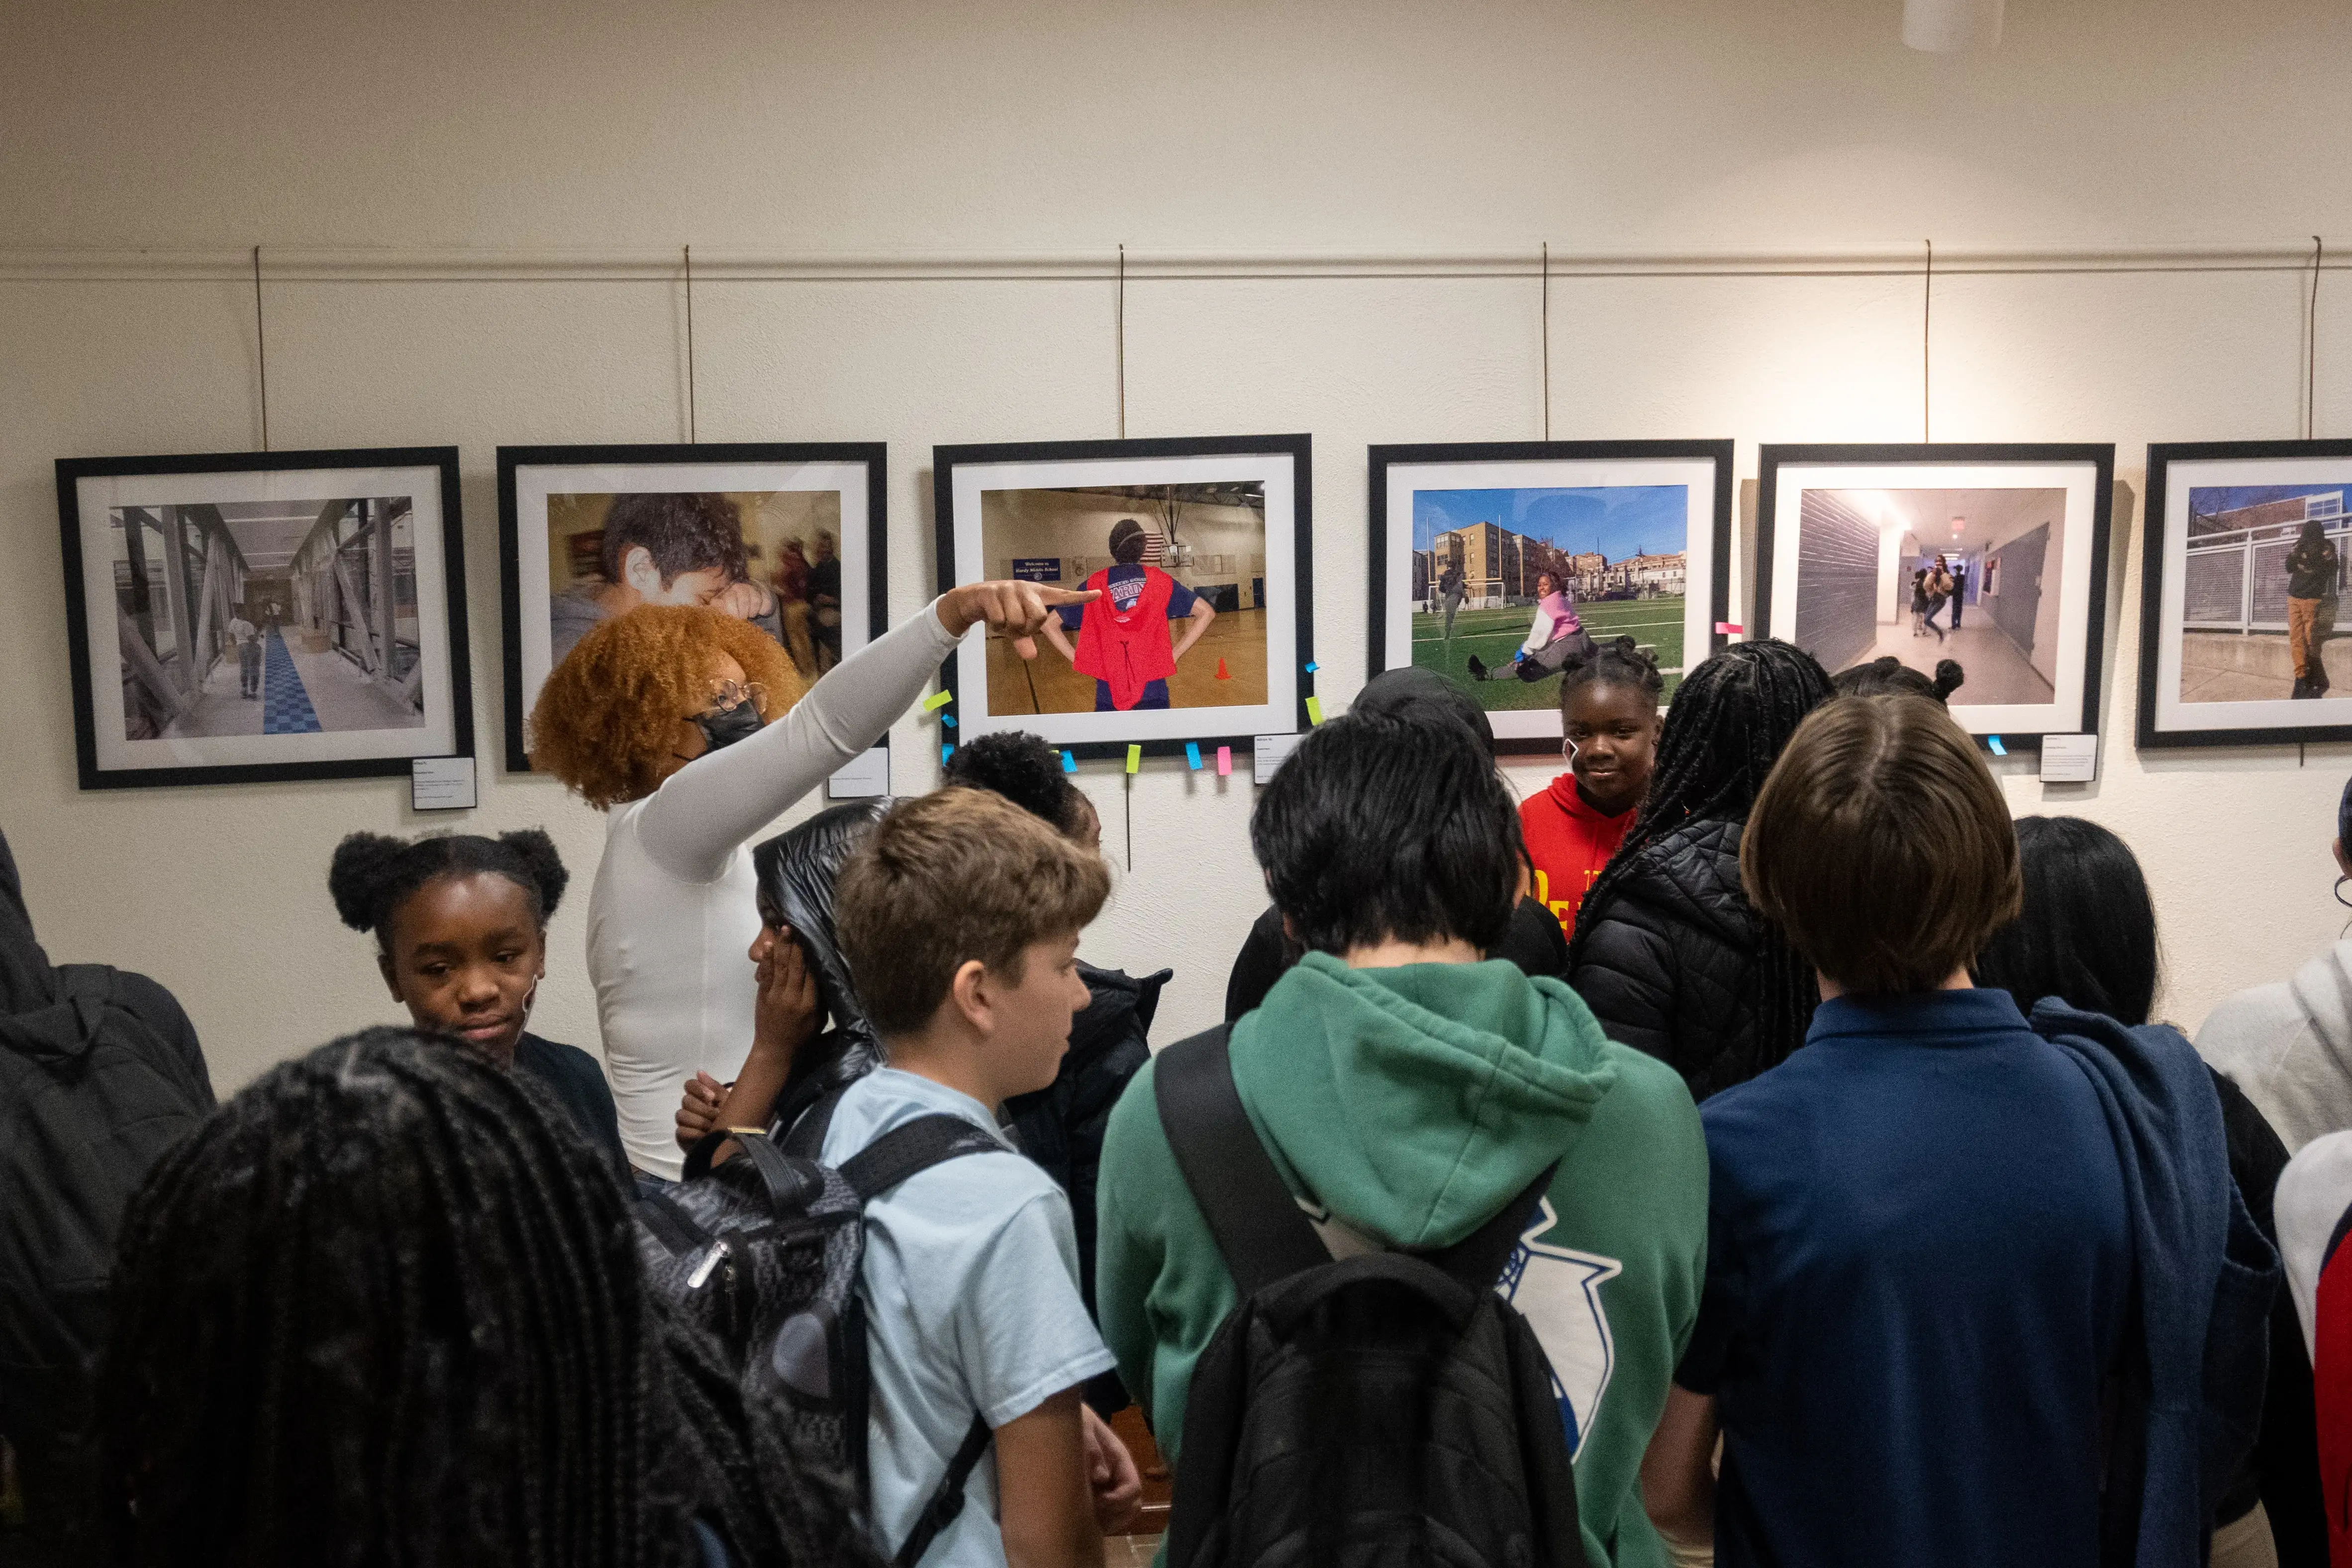 A facilitator from the Pulitzer center guides a conversation with students in the Everyday DC gallery of framed photographs